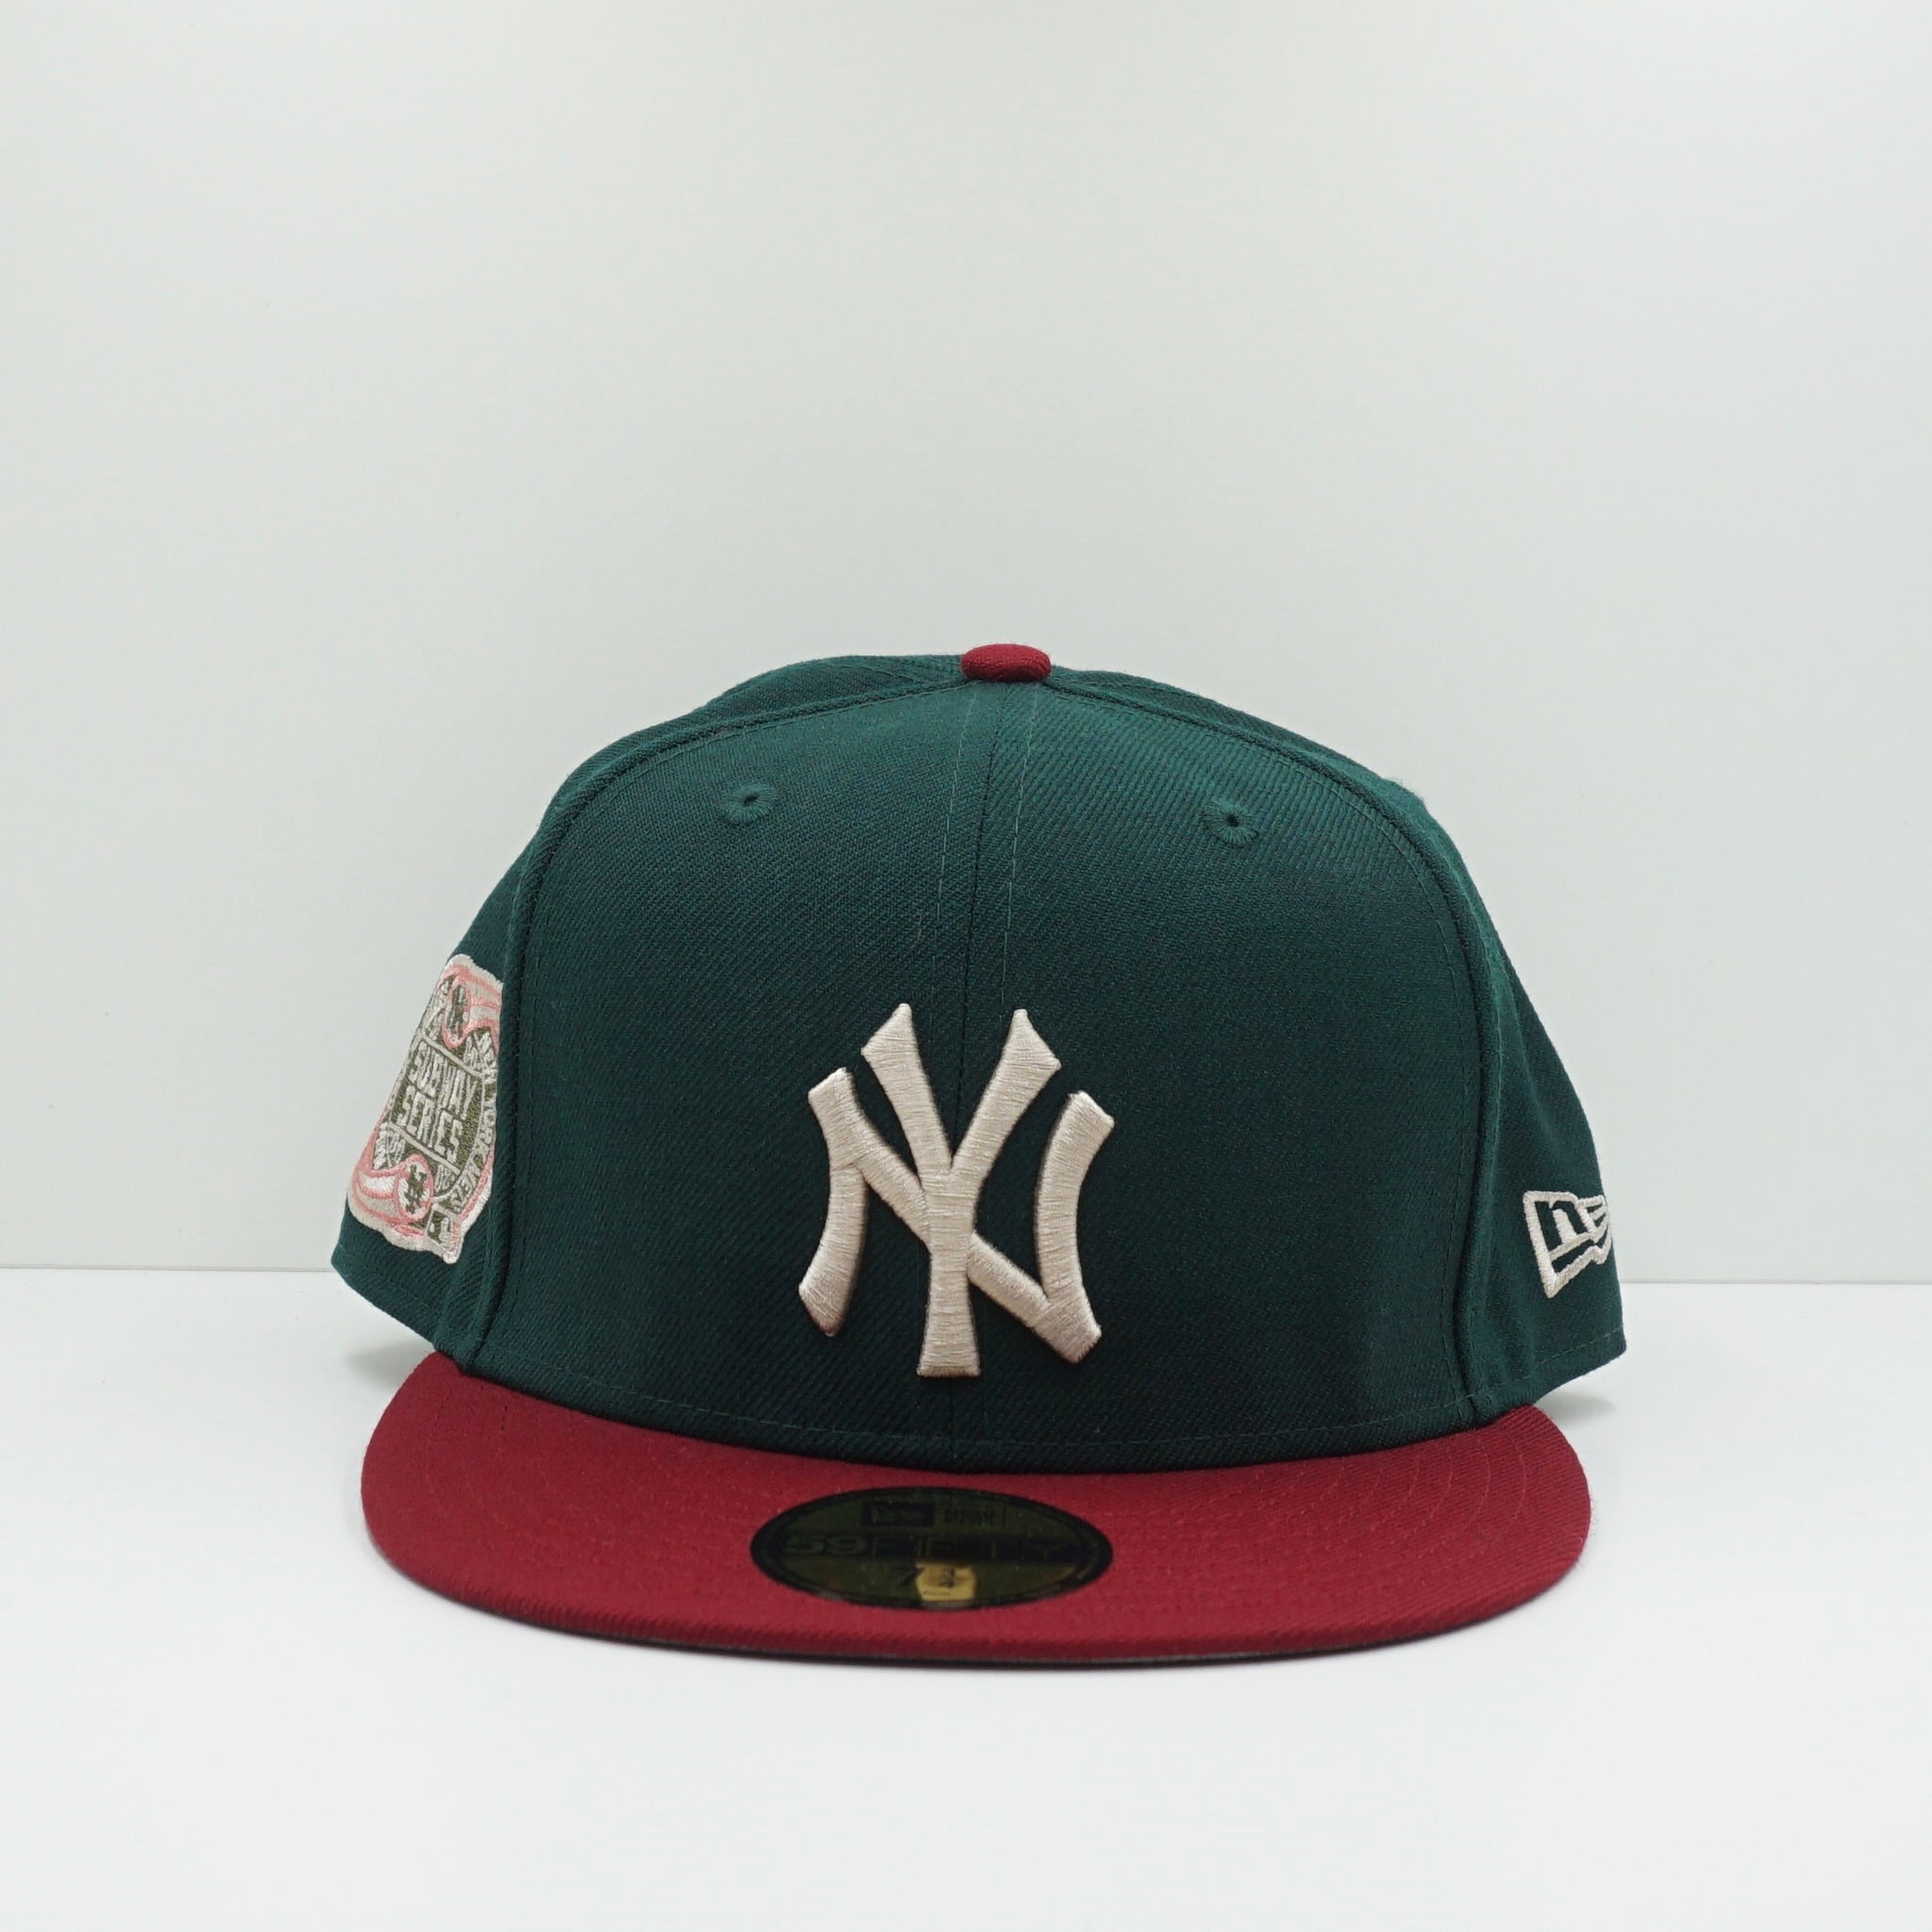 New Era Cooperstown New York Yankees Green/Red Fitted Cap